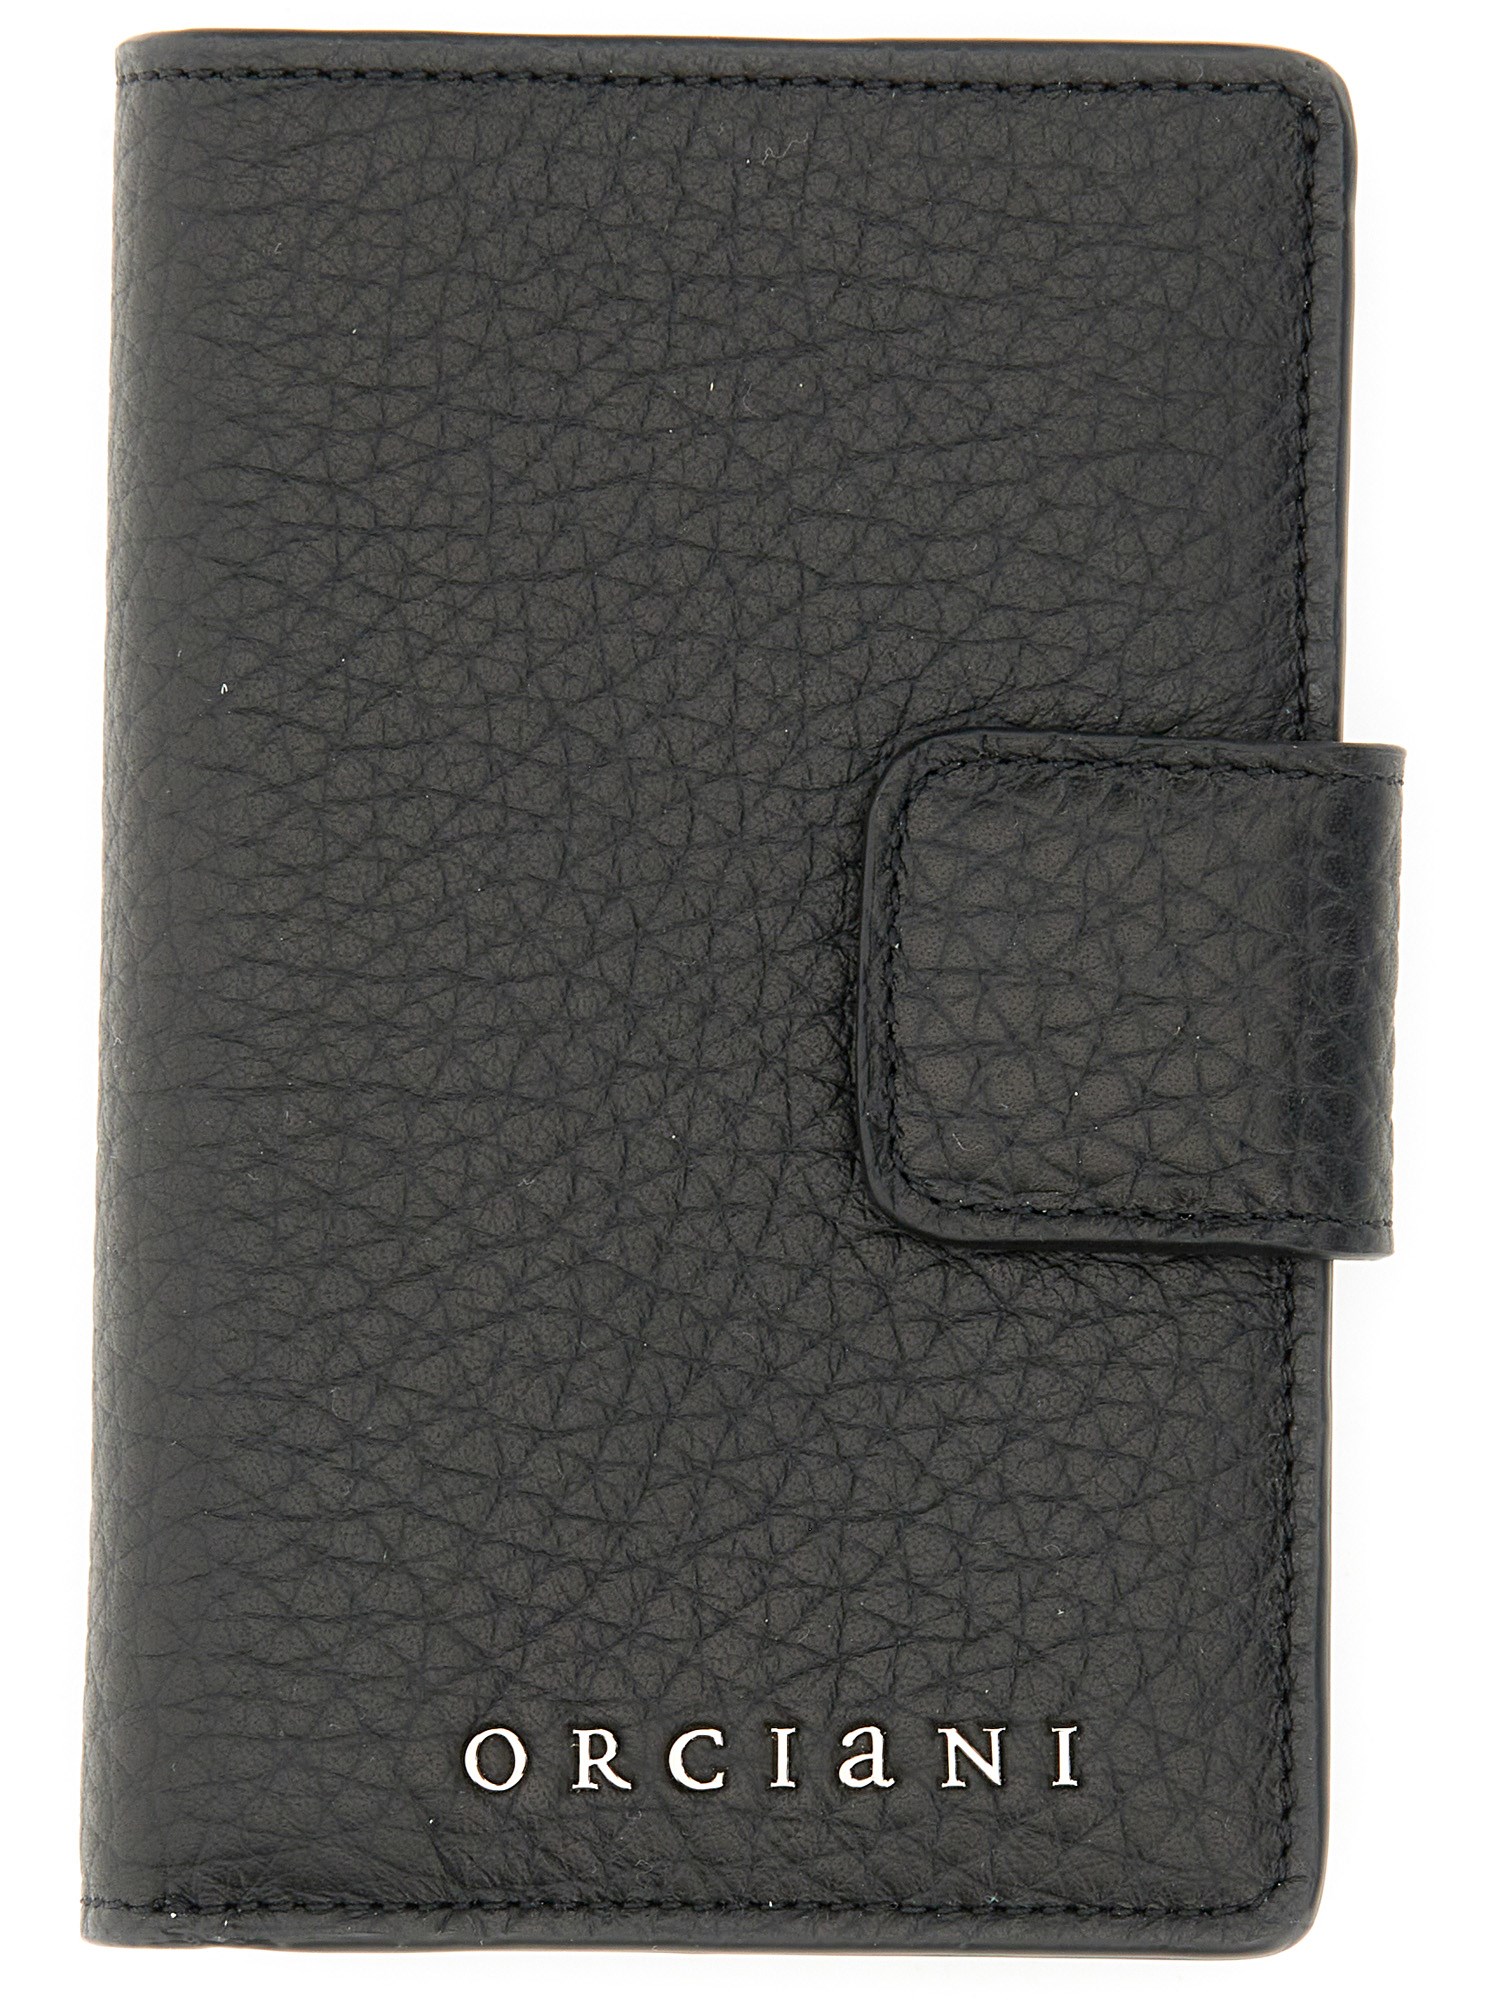 Orciani orciani leather wallet